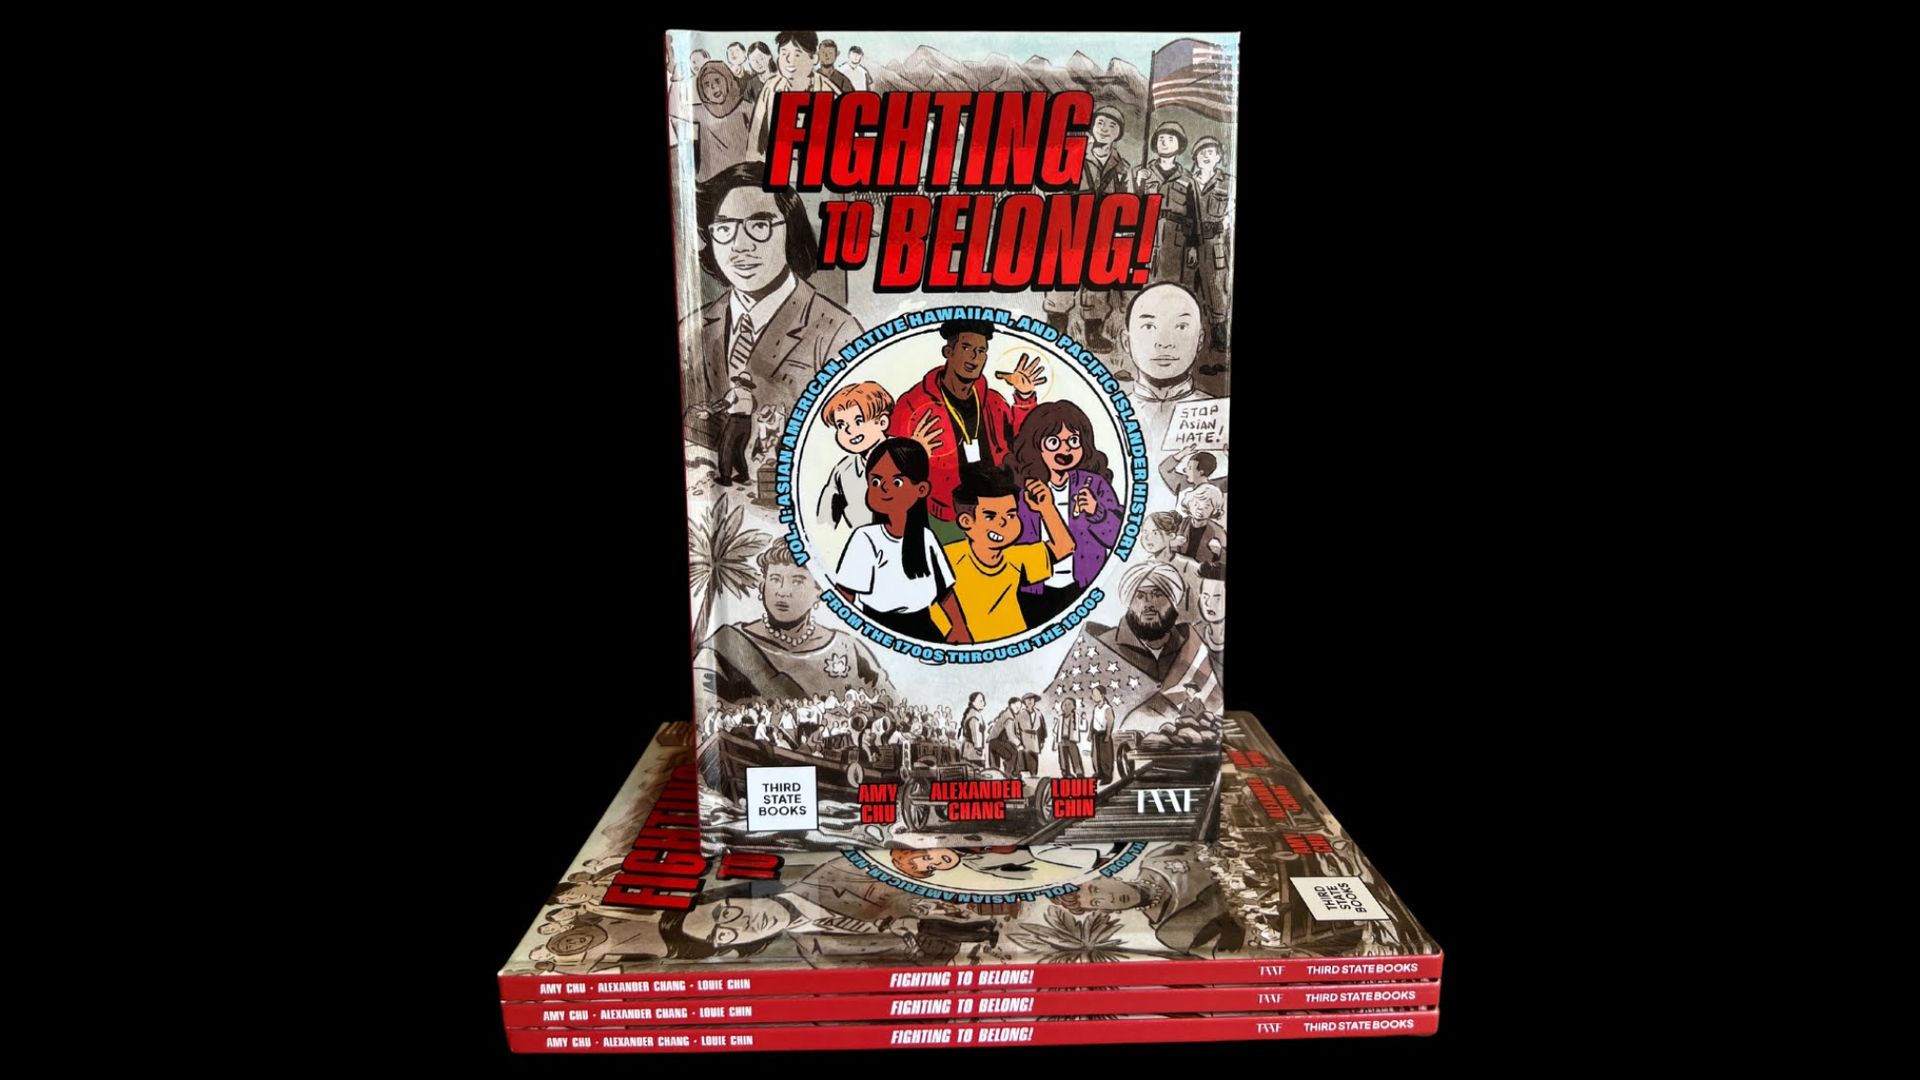 Photo of the "Fighting to Belong!" comic book